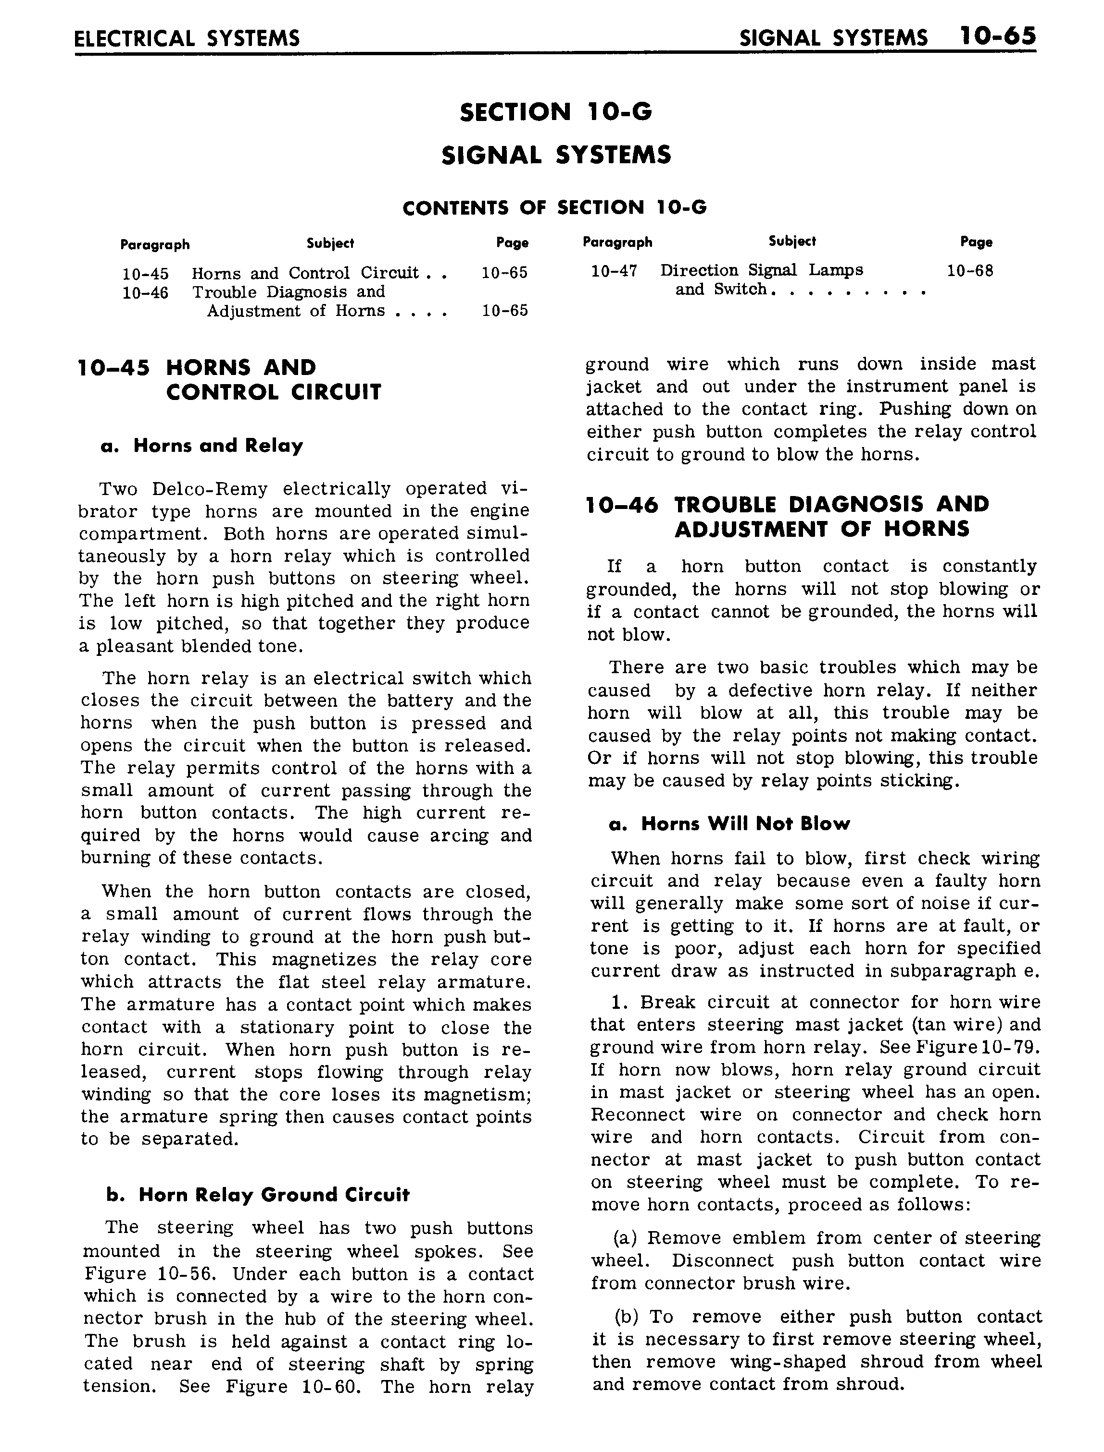 n_10 1961 Buick Shop Manual - Electrical Systems-065-065.jpg